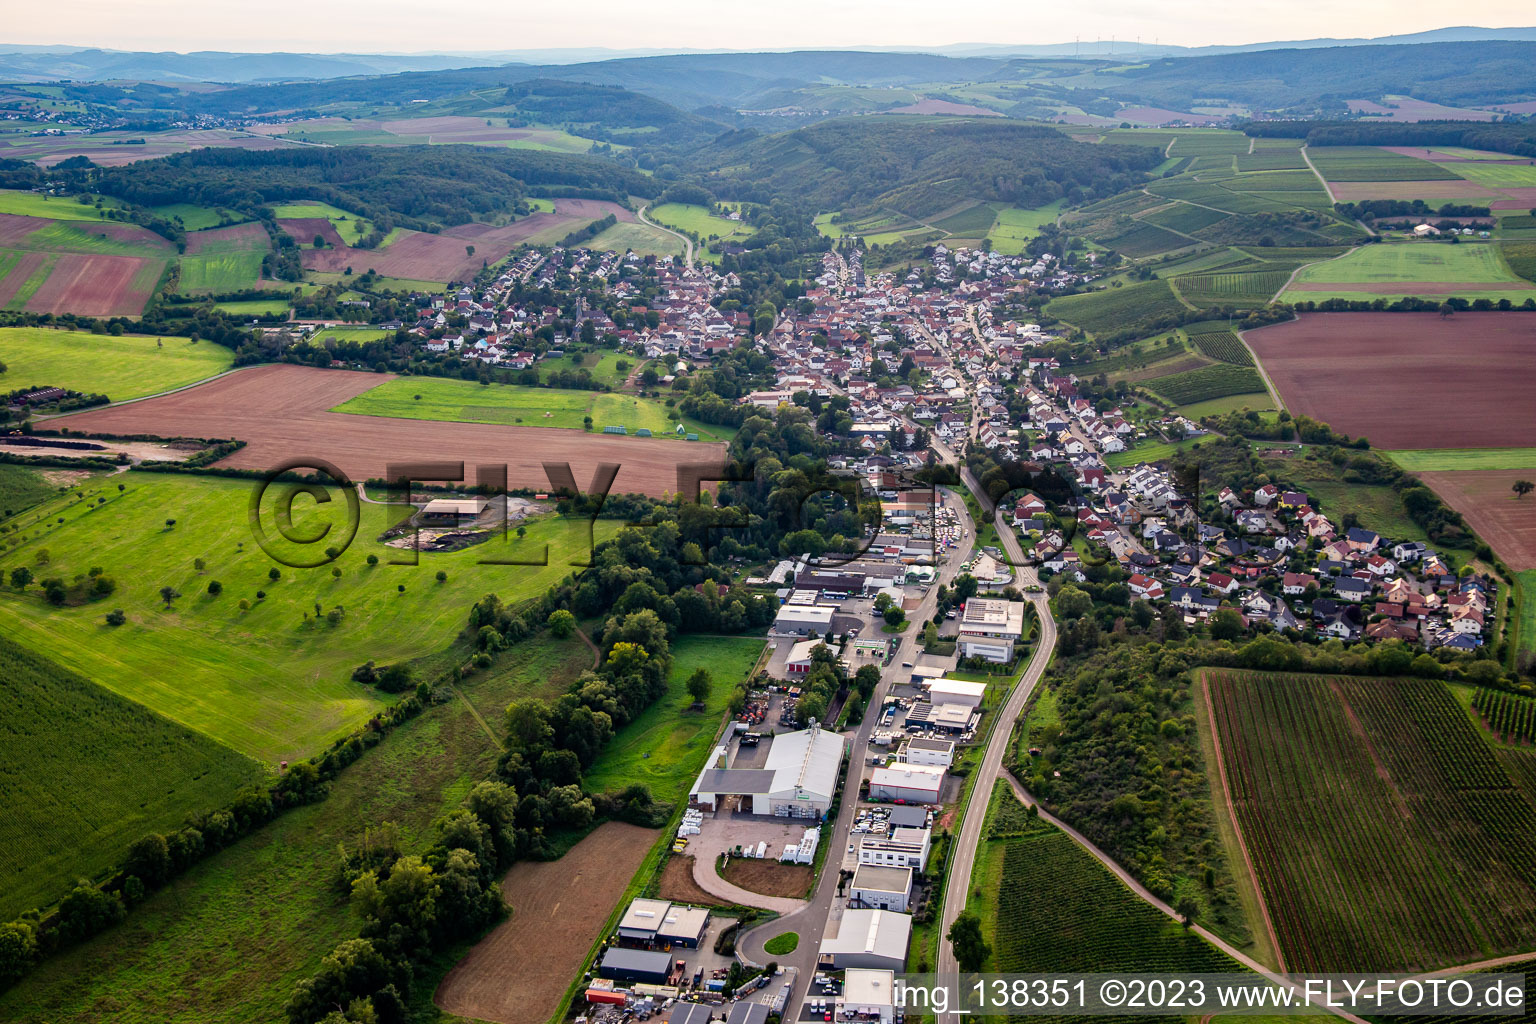 From the east in Weinsheim in the state Rhineland-Palatinate, Germany